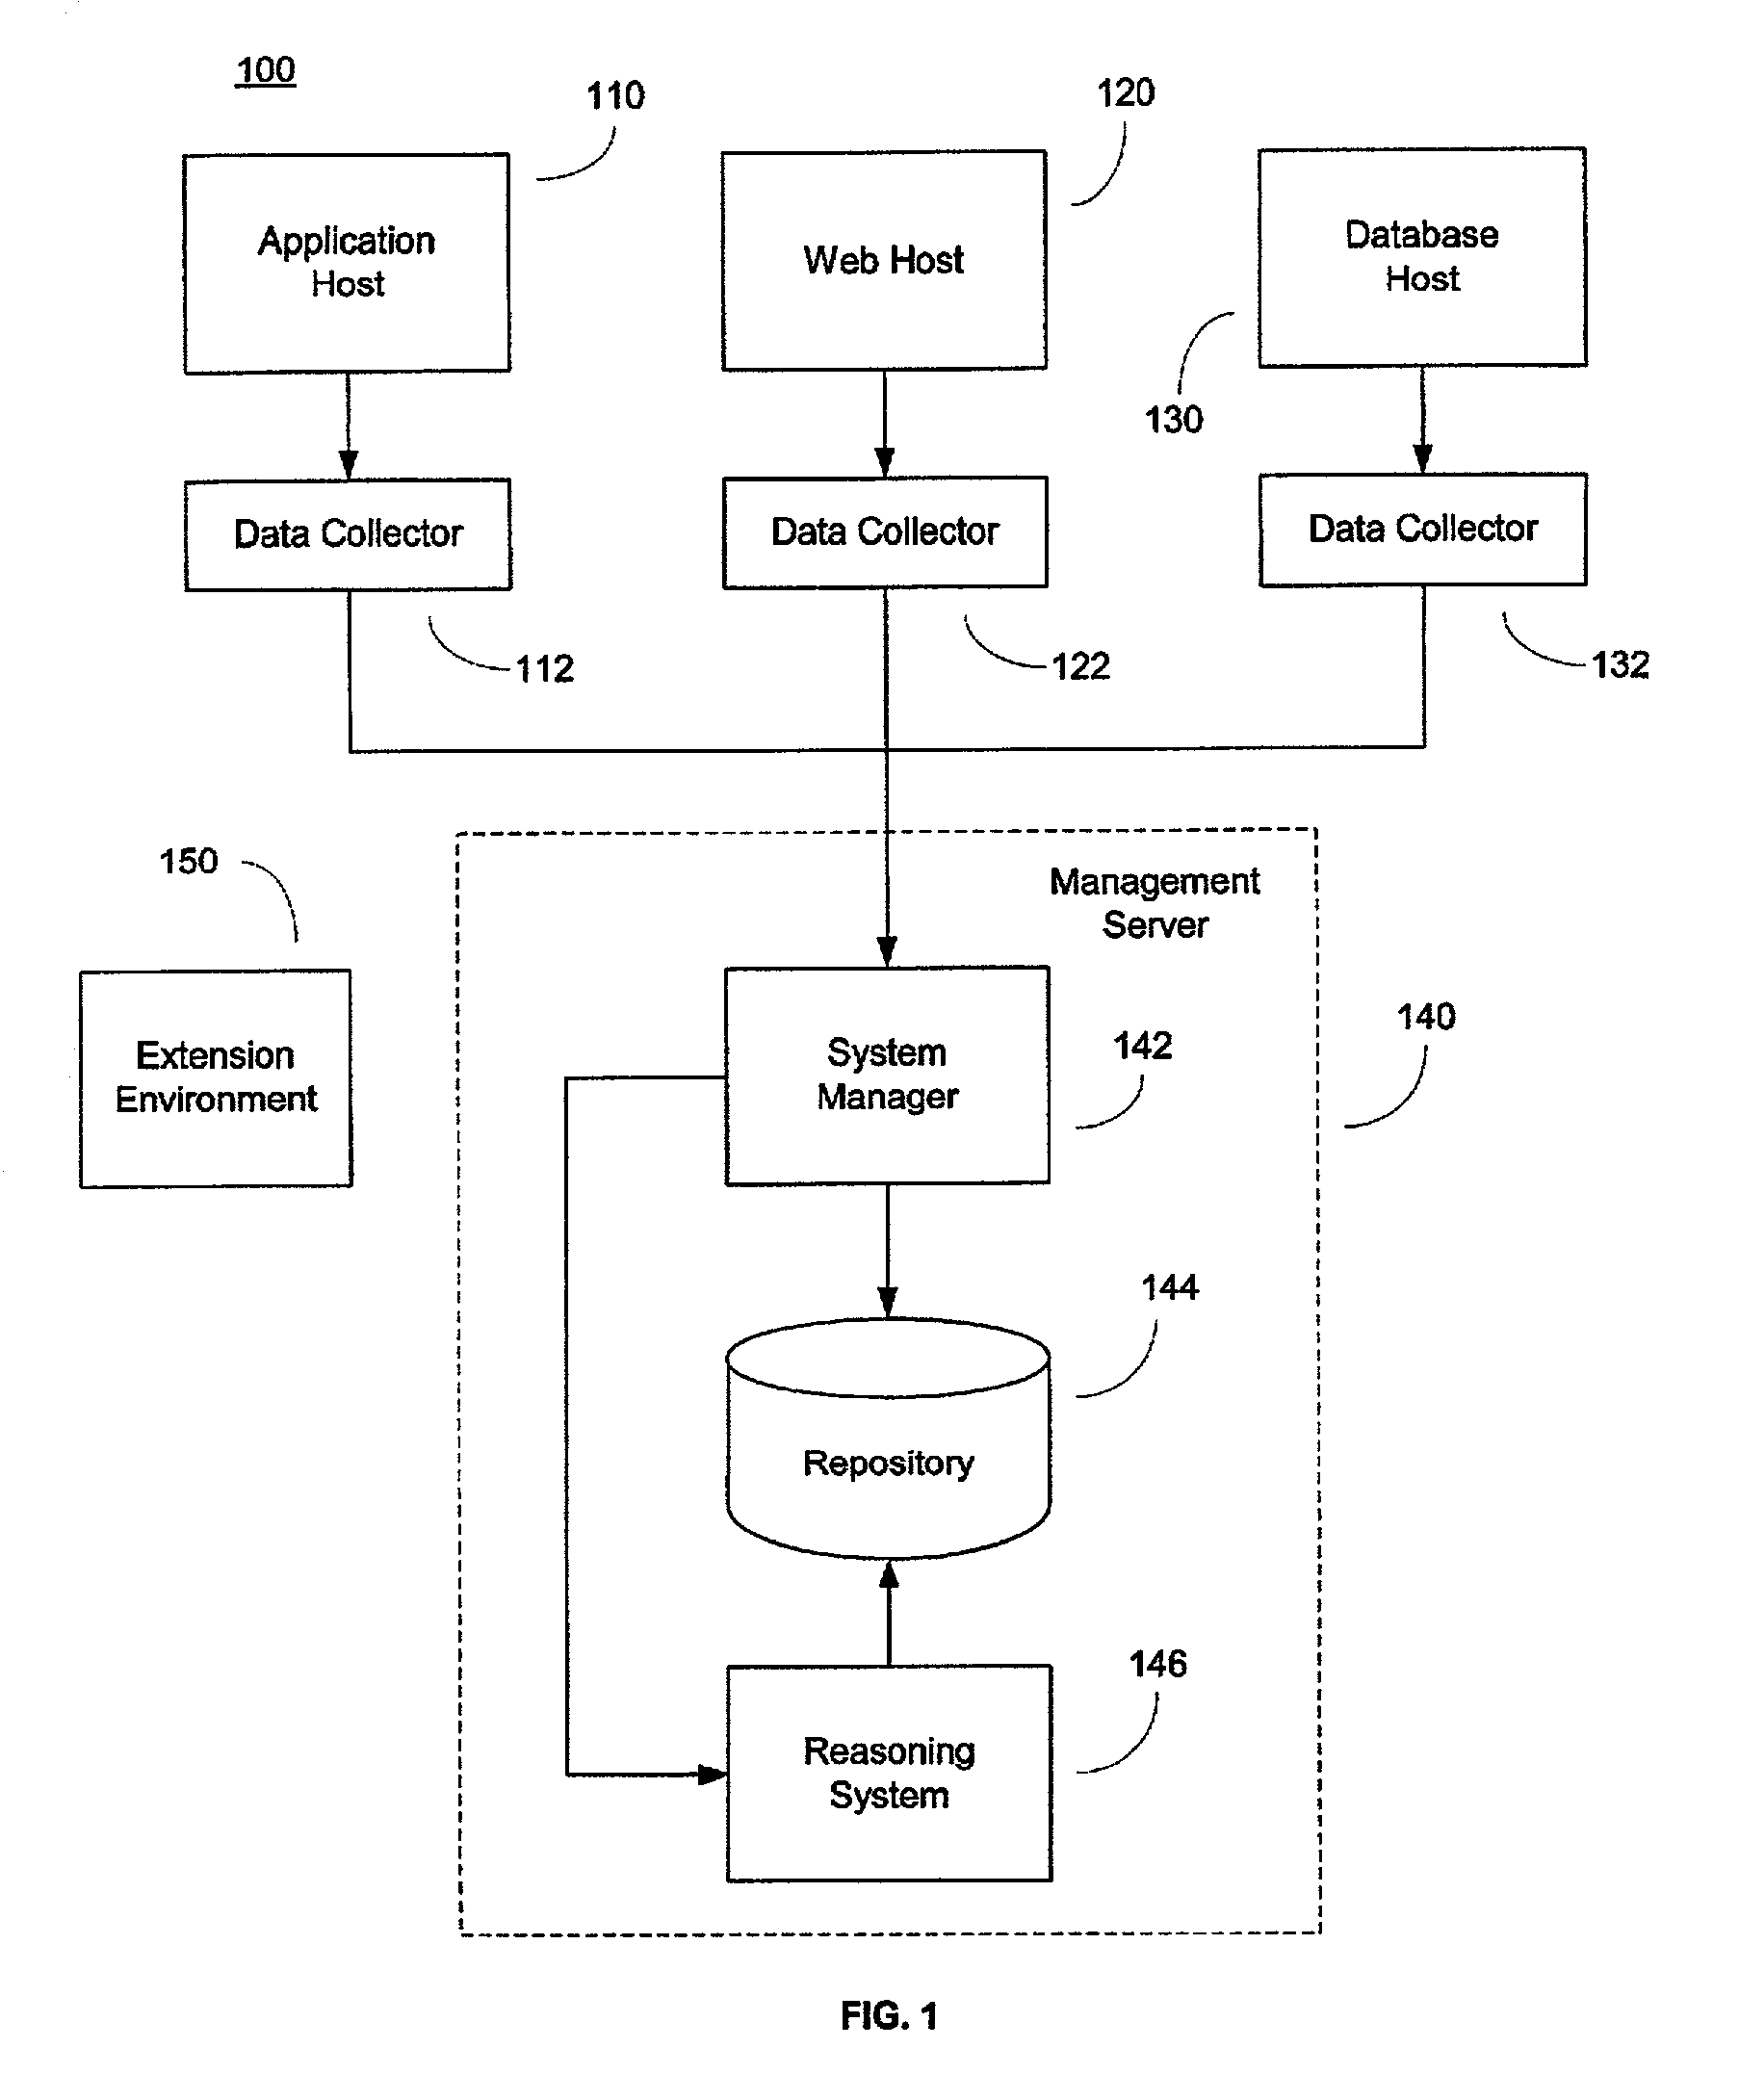 System and method for correlating and diagnosing system component performance data